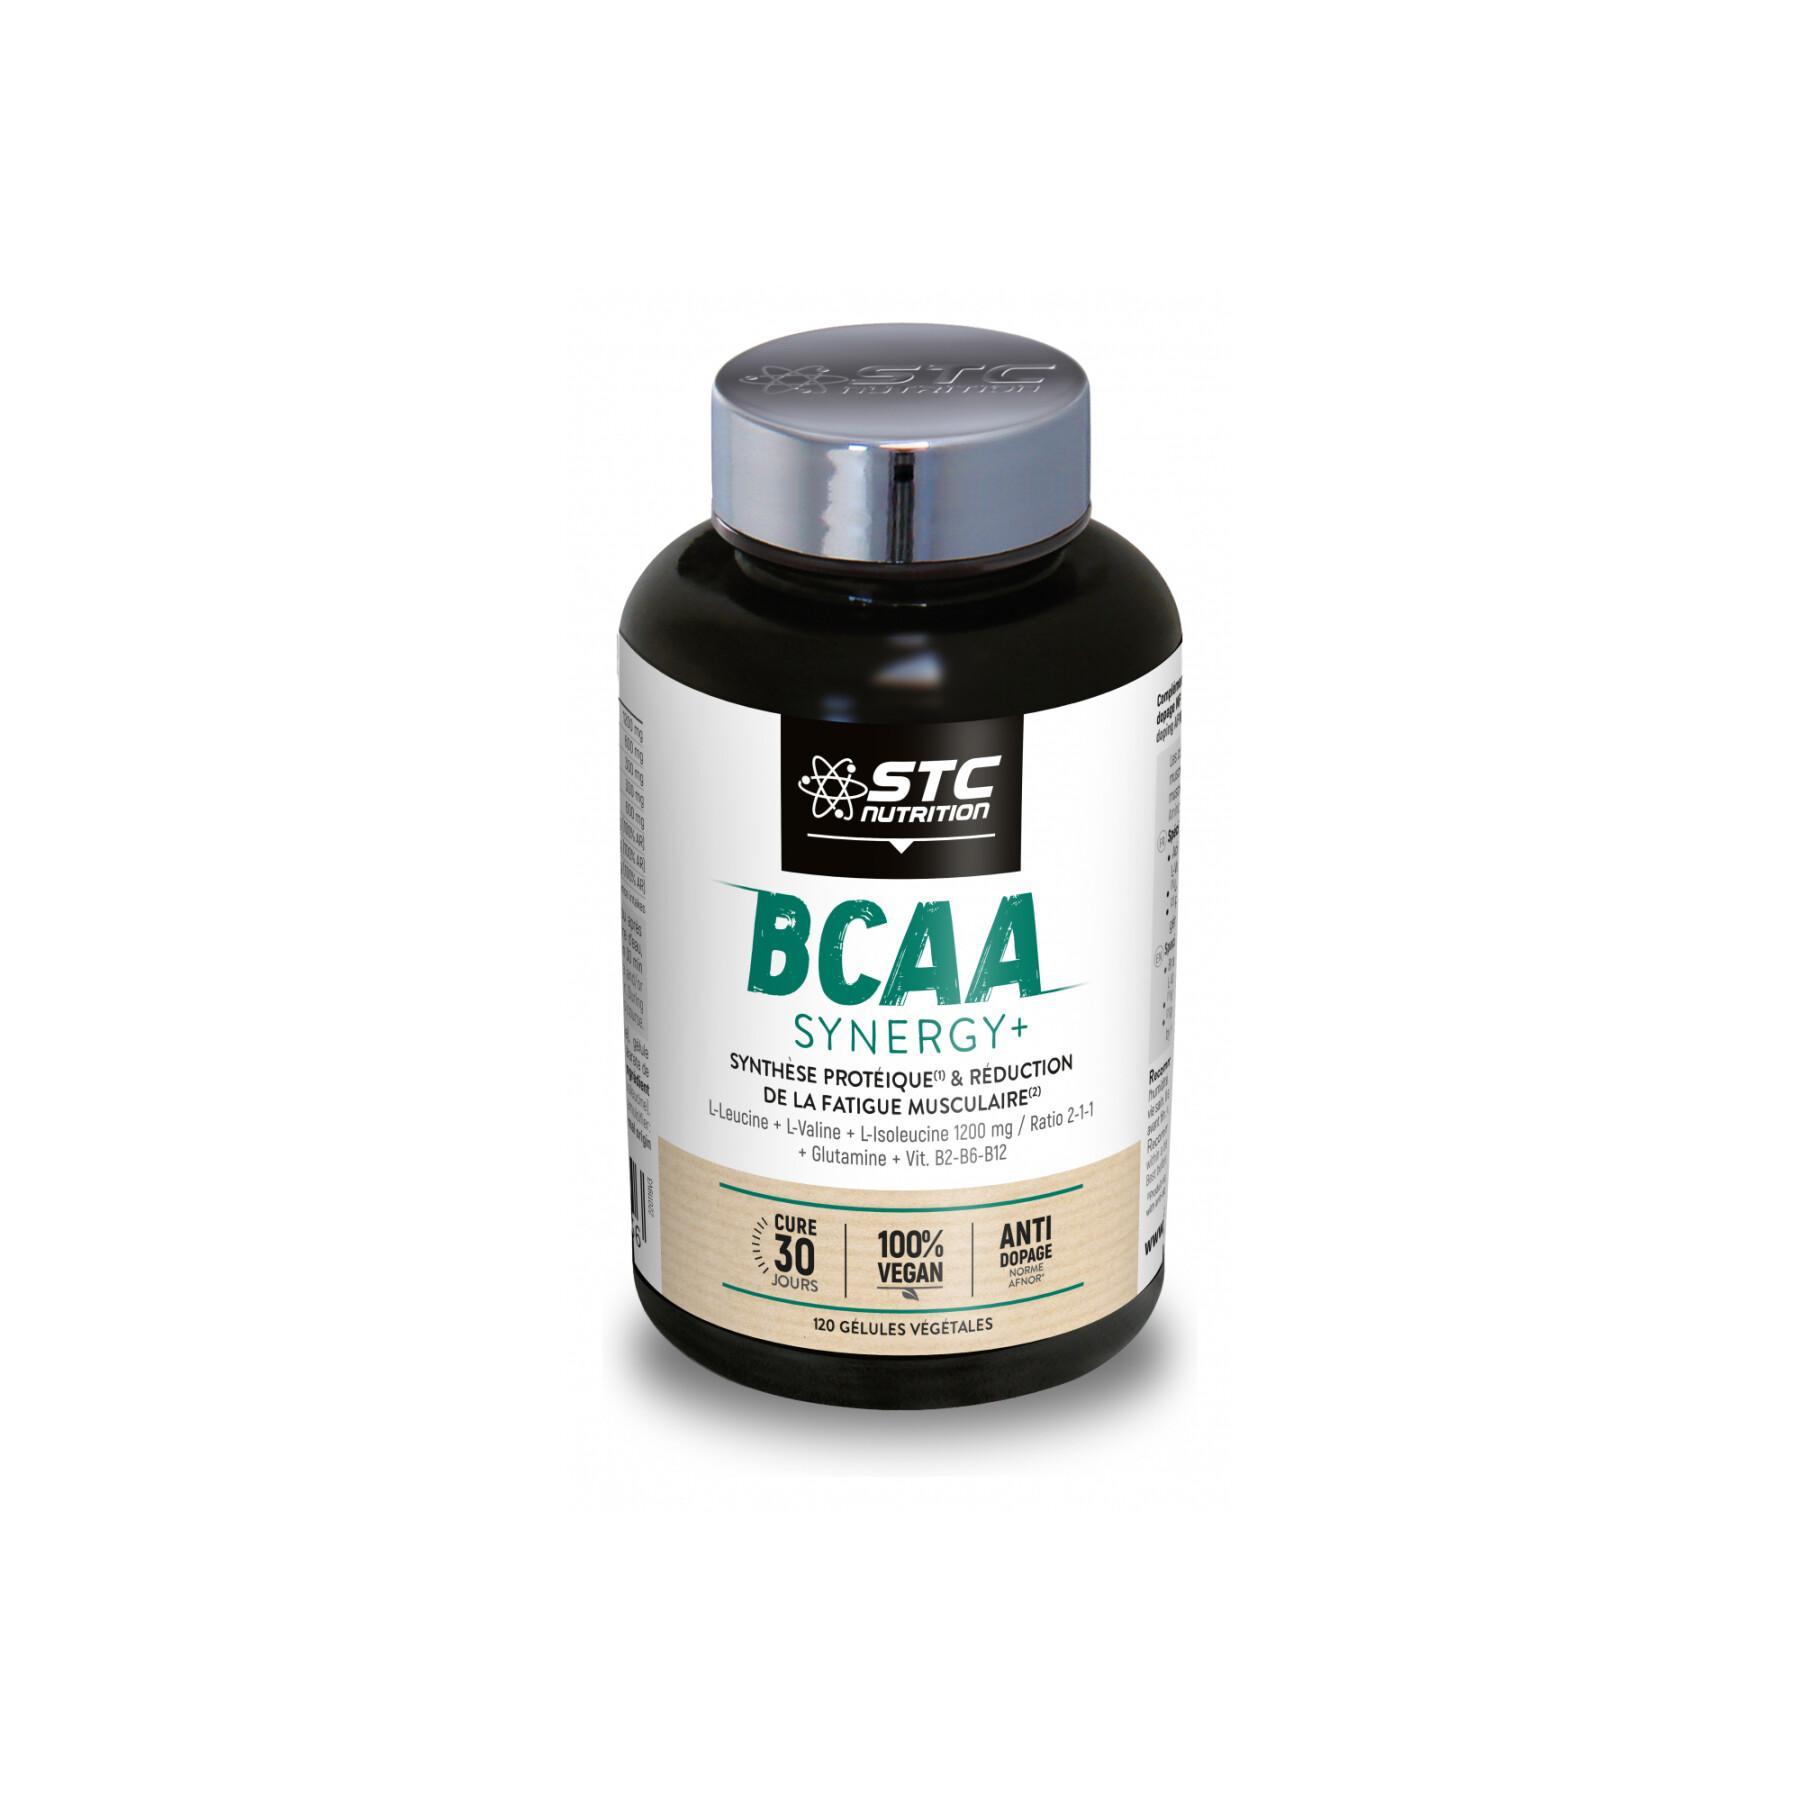 Protein synthesis & muscle fatigue reduction bcaa synergy+ STC Nutrition - 120 gélules végétales